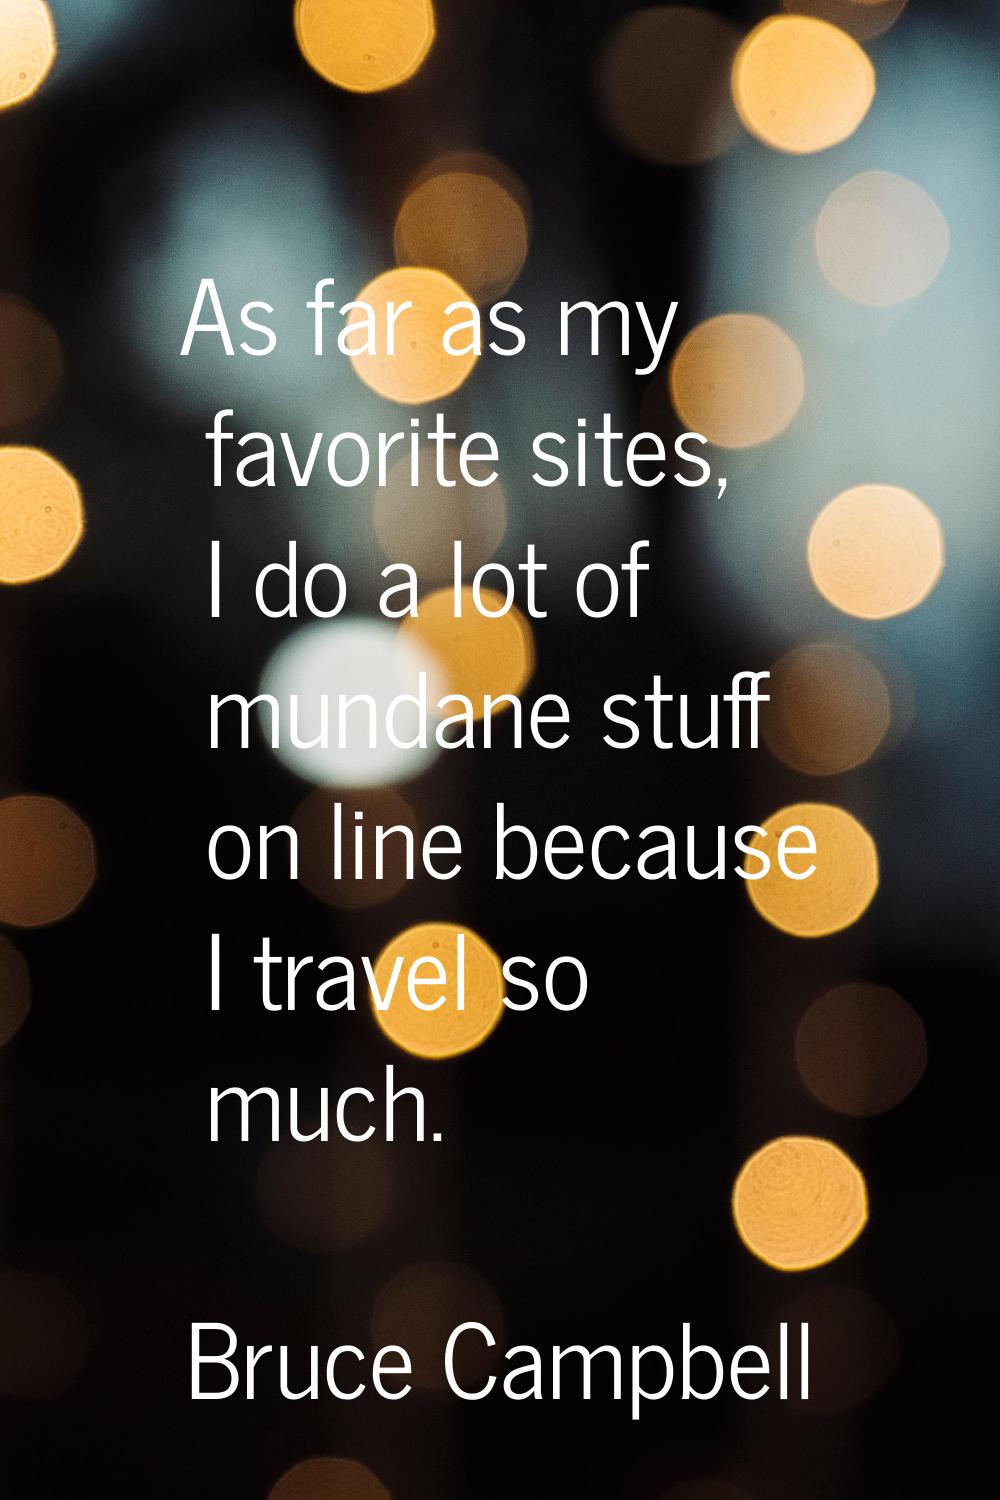 As far as my favorite sites, I do a lot of mundane stuff on line because I travel so much.